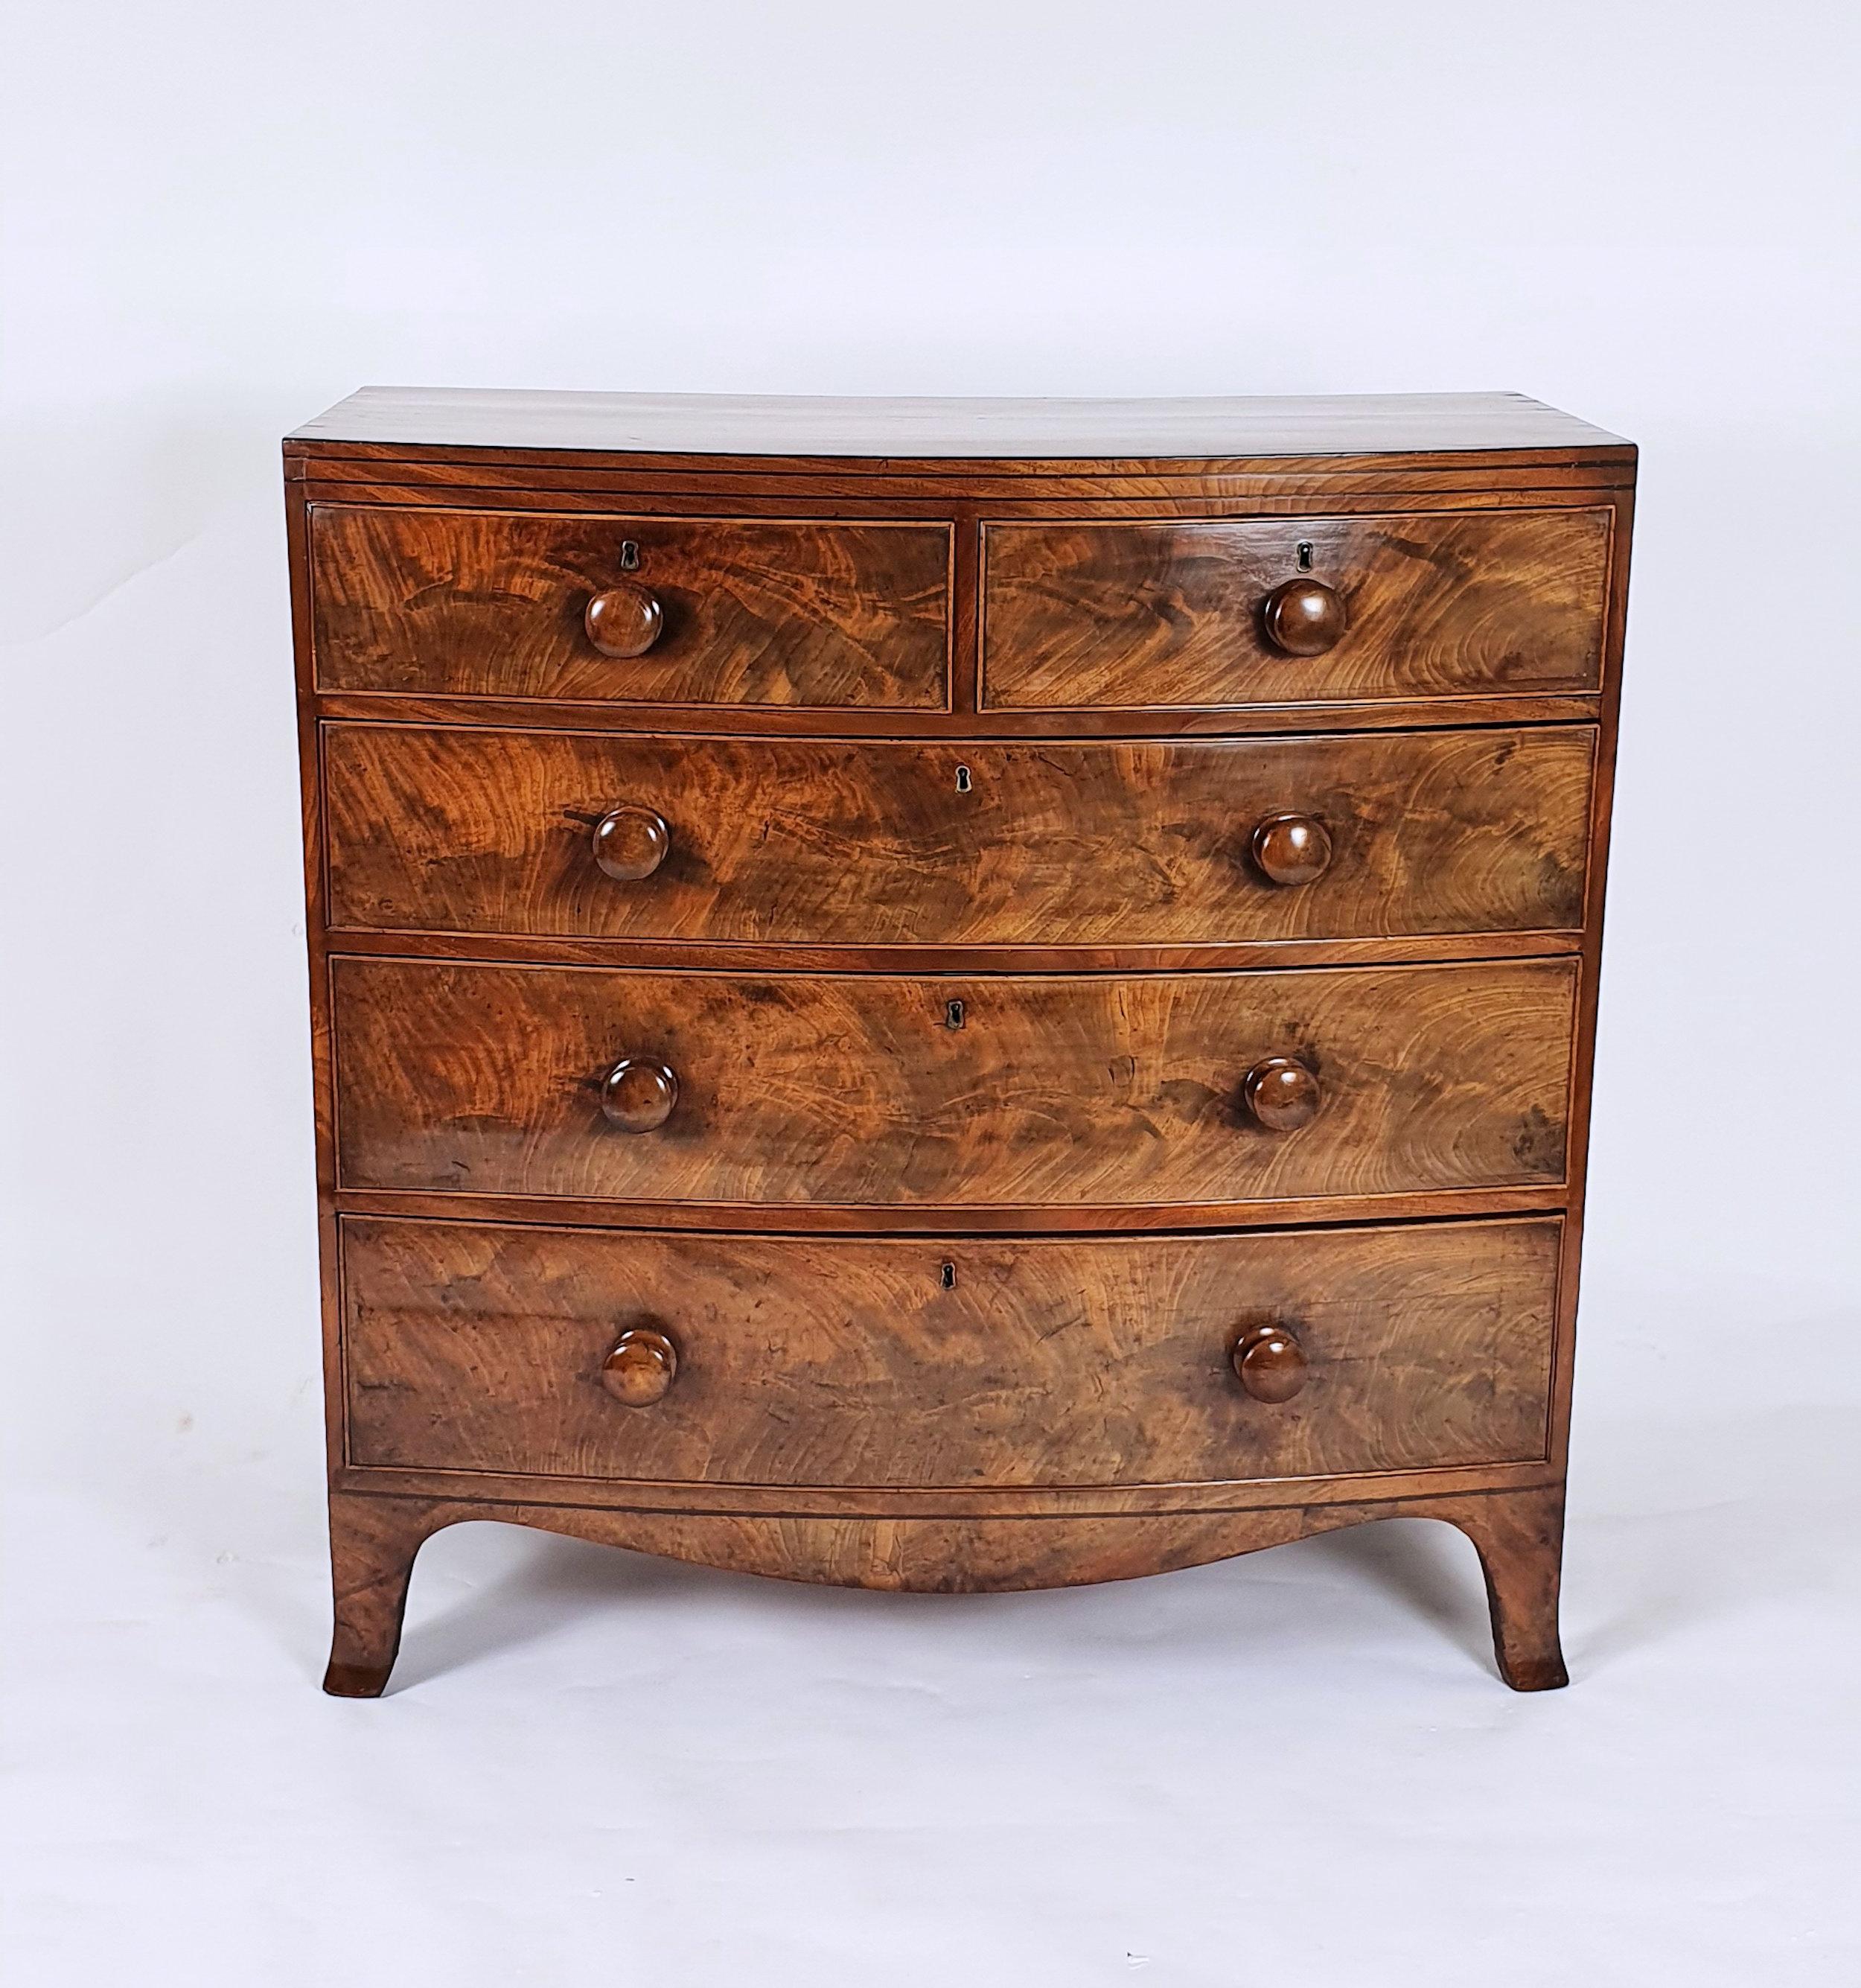 British Early 19th Century English Flame Mahogany Bow Fronted Chest of Drawers